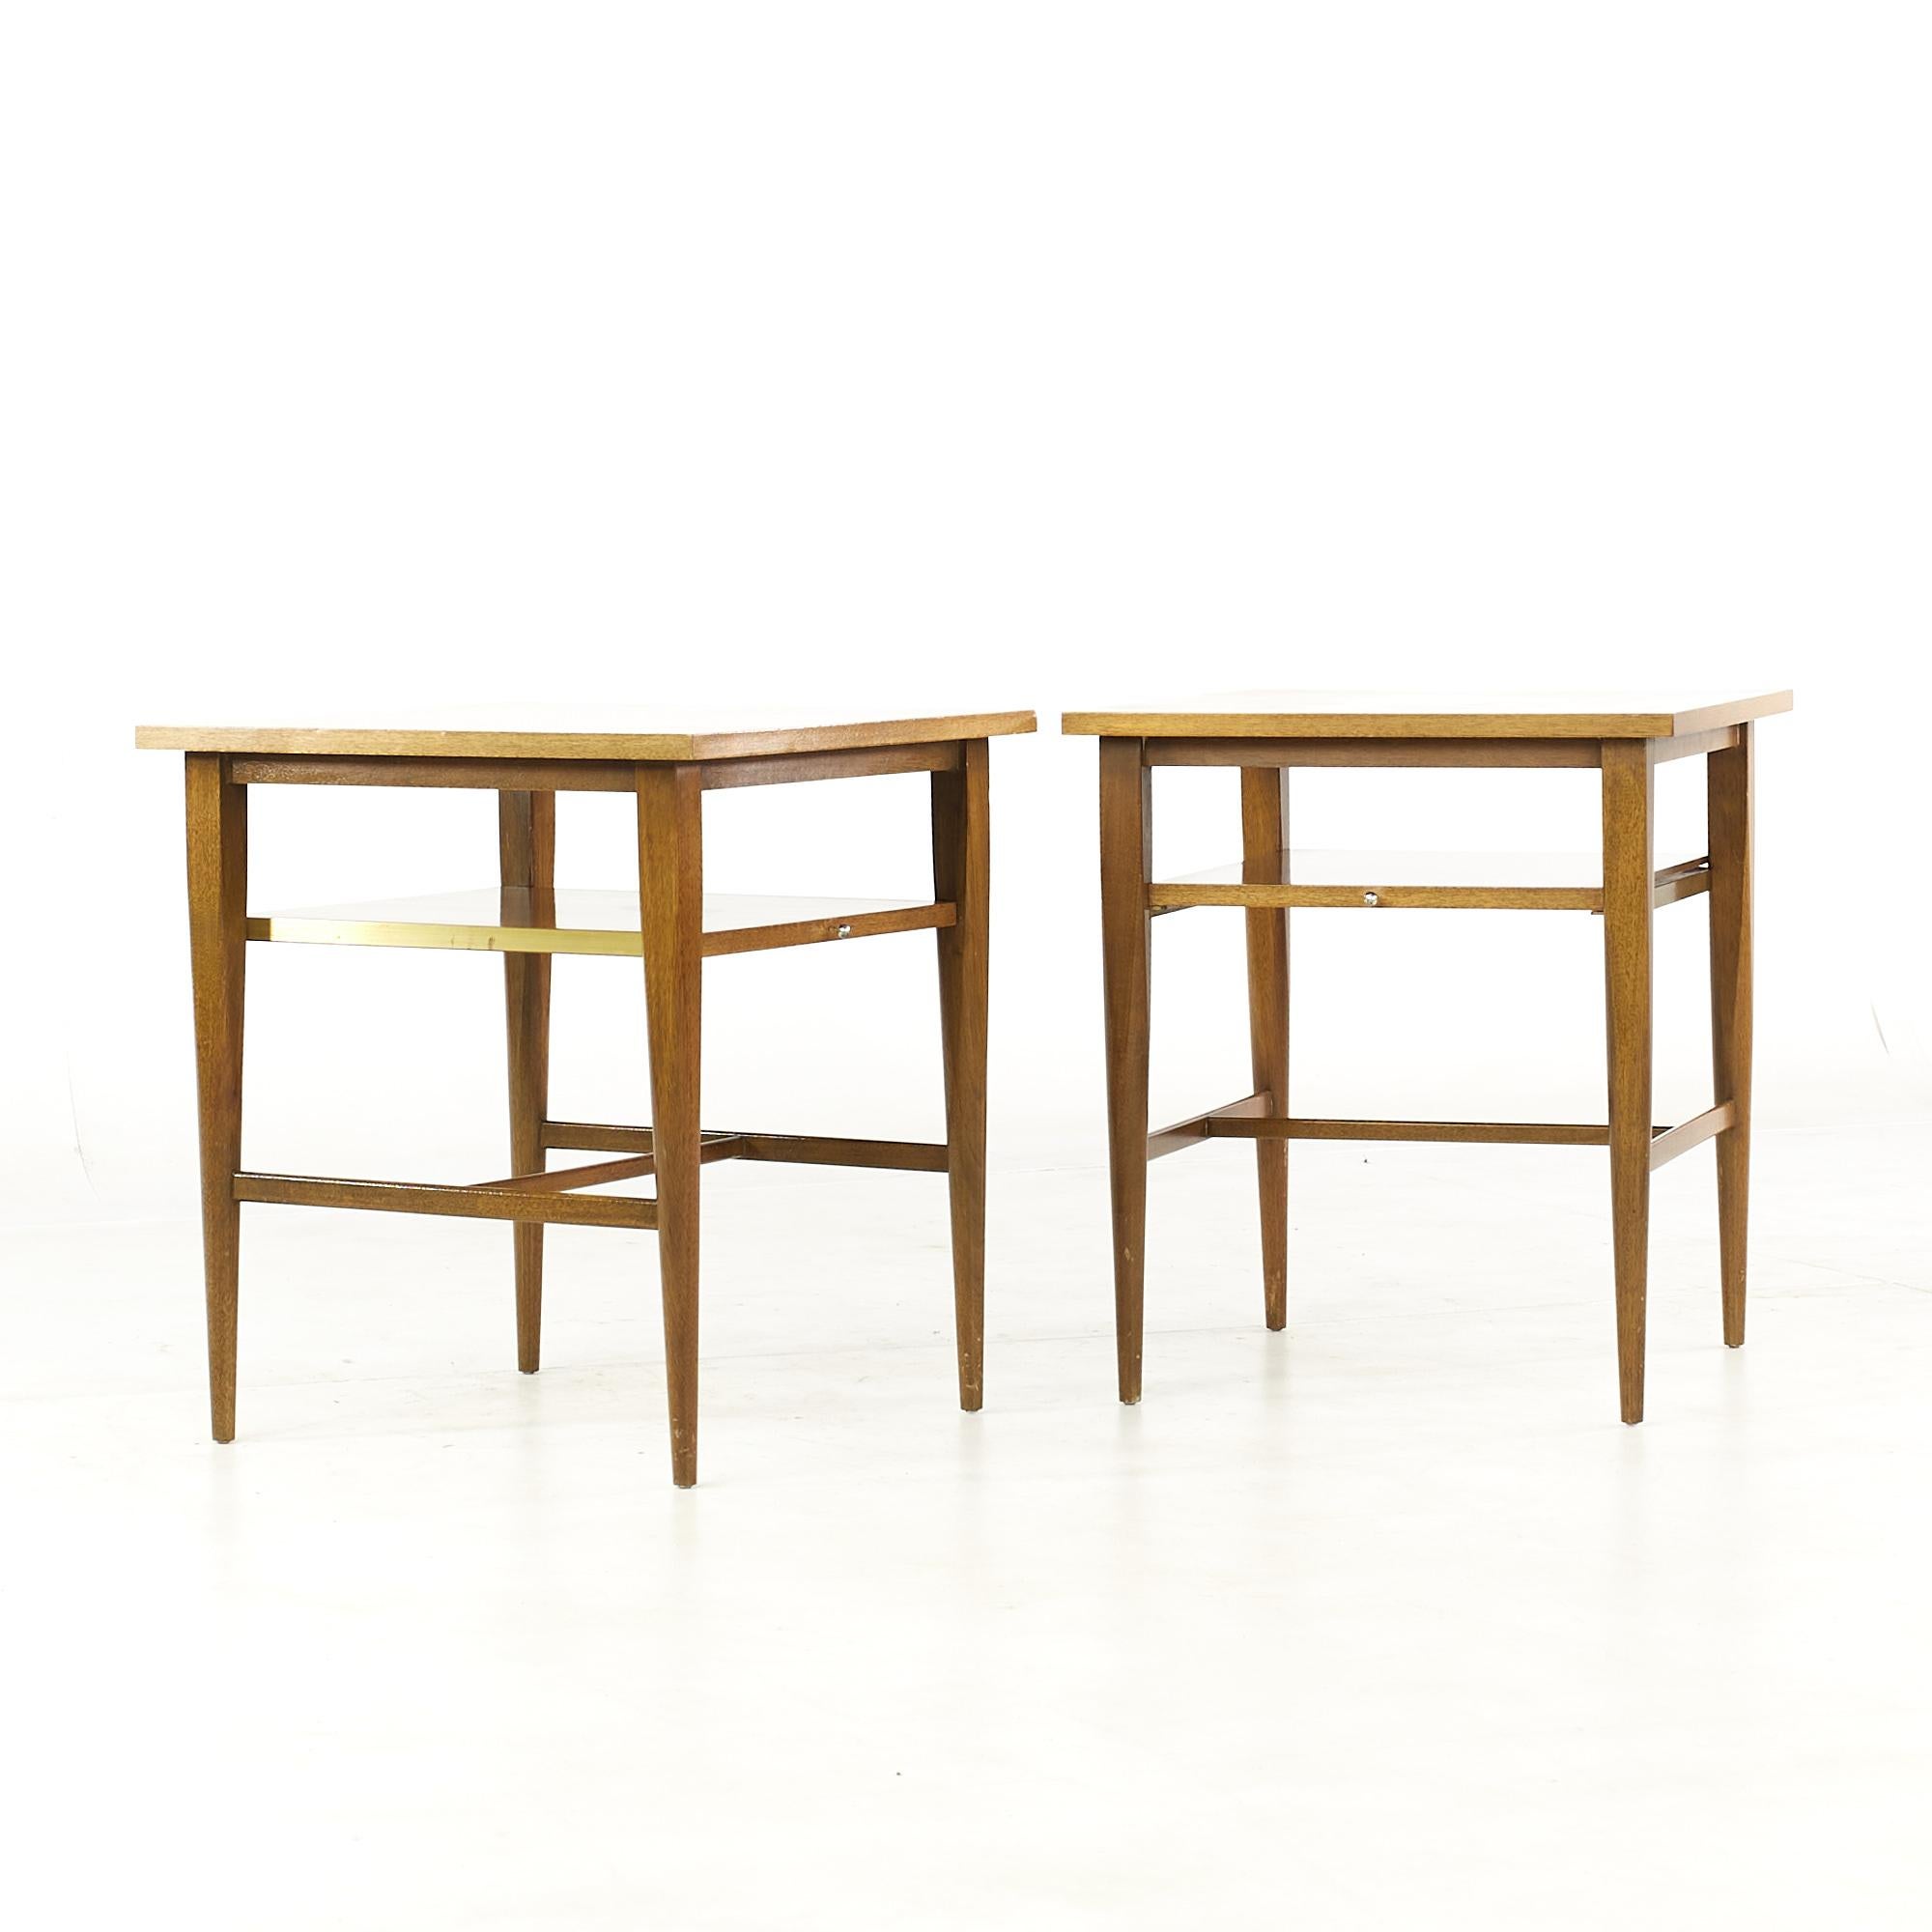 Paul McCobb for Calvin mid century side end tables - pair

Each table measures: 21 wide x 22 deep x 24 inches high

All pieces of furniture can be had in what we call restored vintage condition. That means the piece is restored upon purchase so